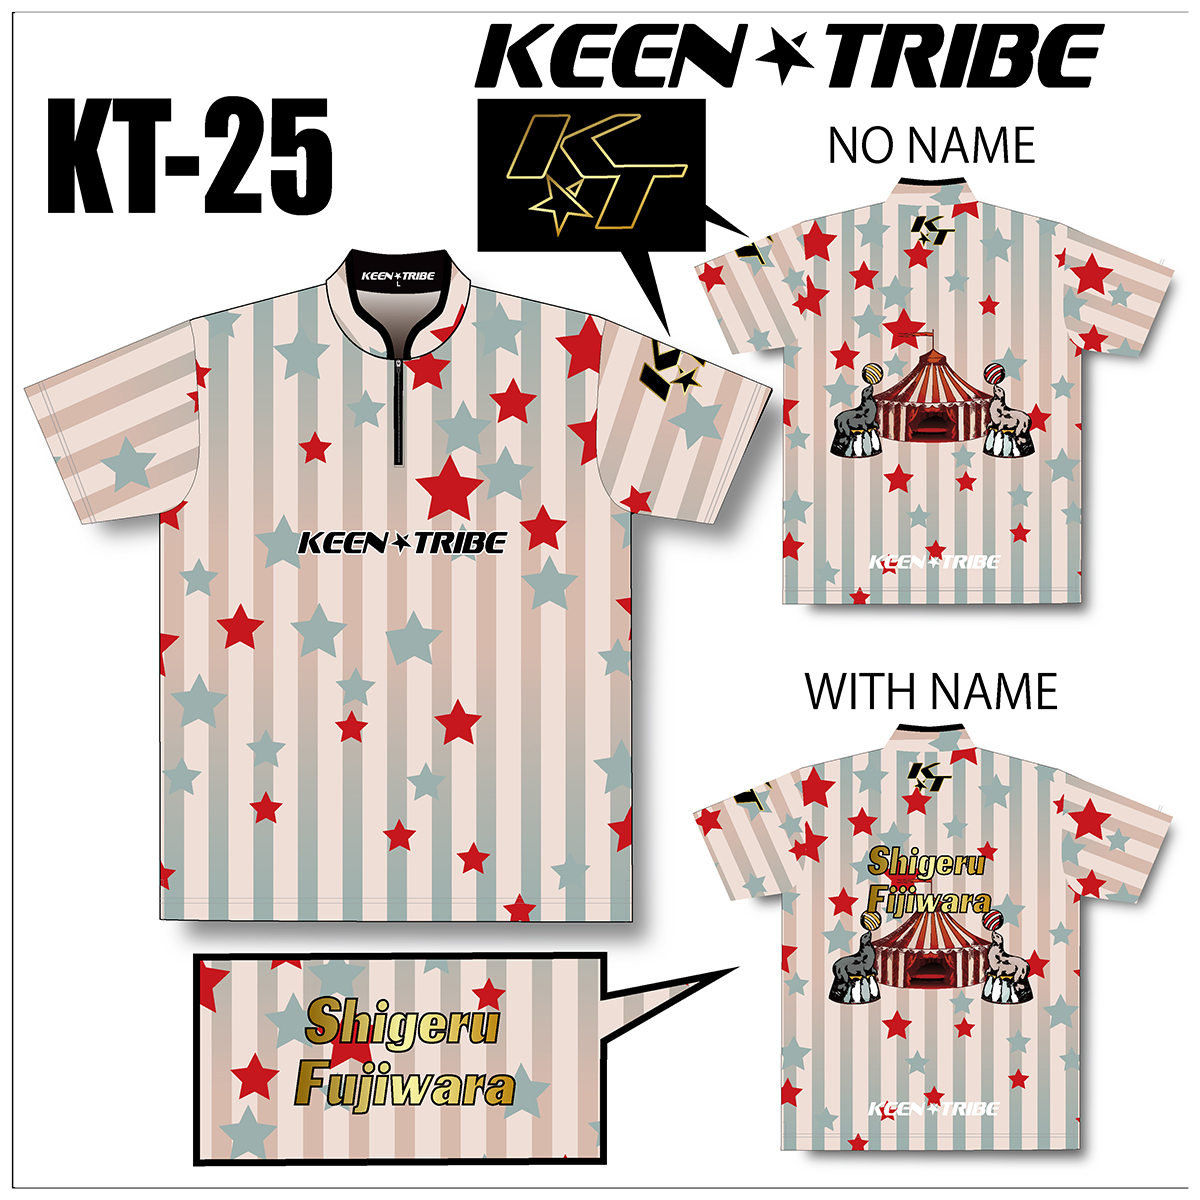 KEEN ★ TRIBE　KT-25(受注生産)